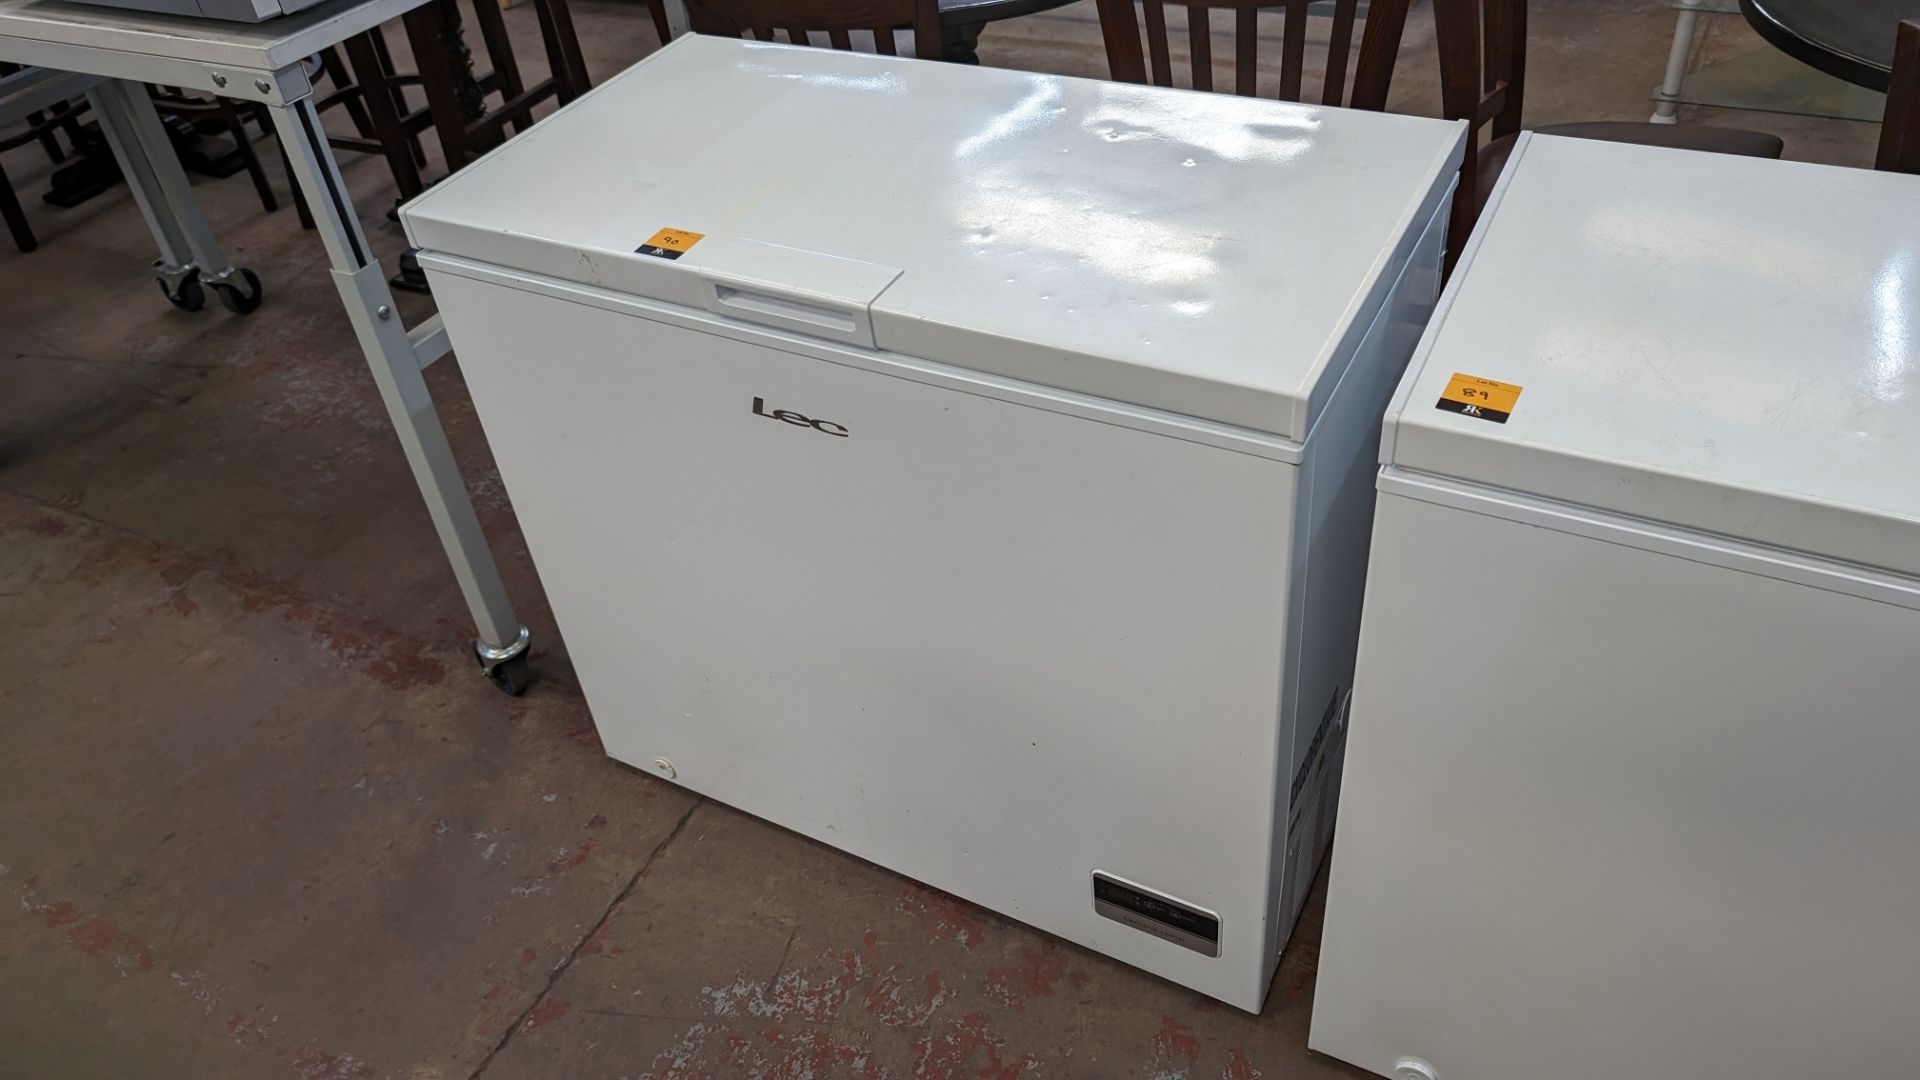 LEC electronic control chest freezer, measuring approximately 950mm long